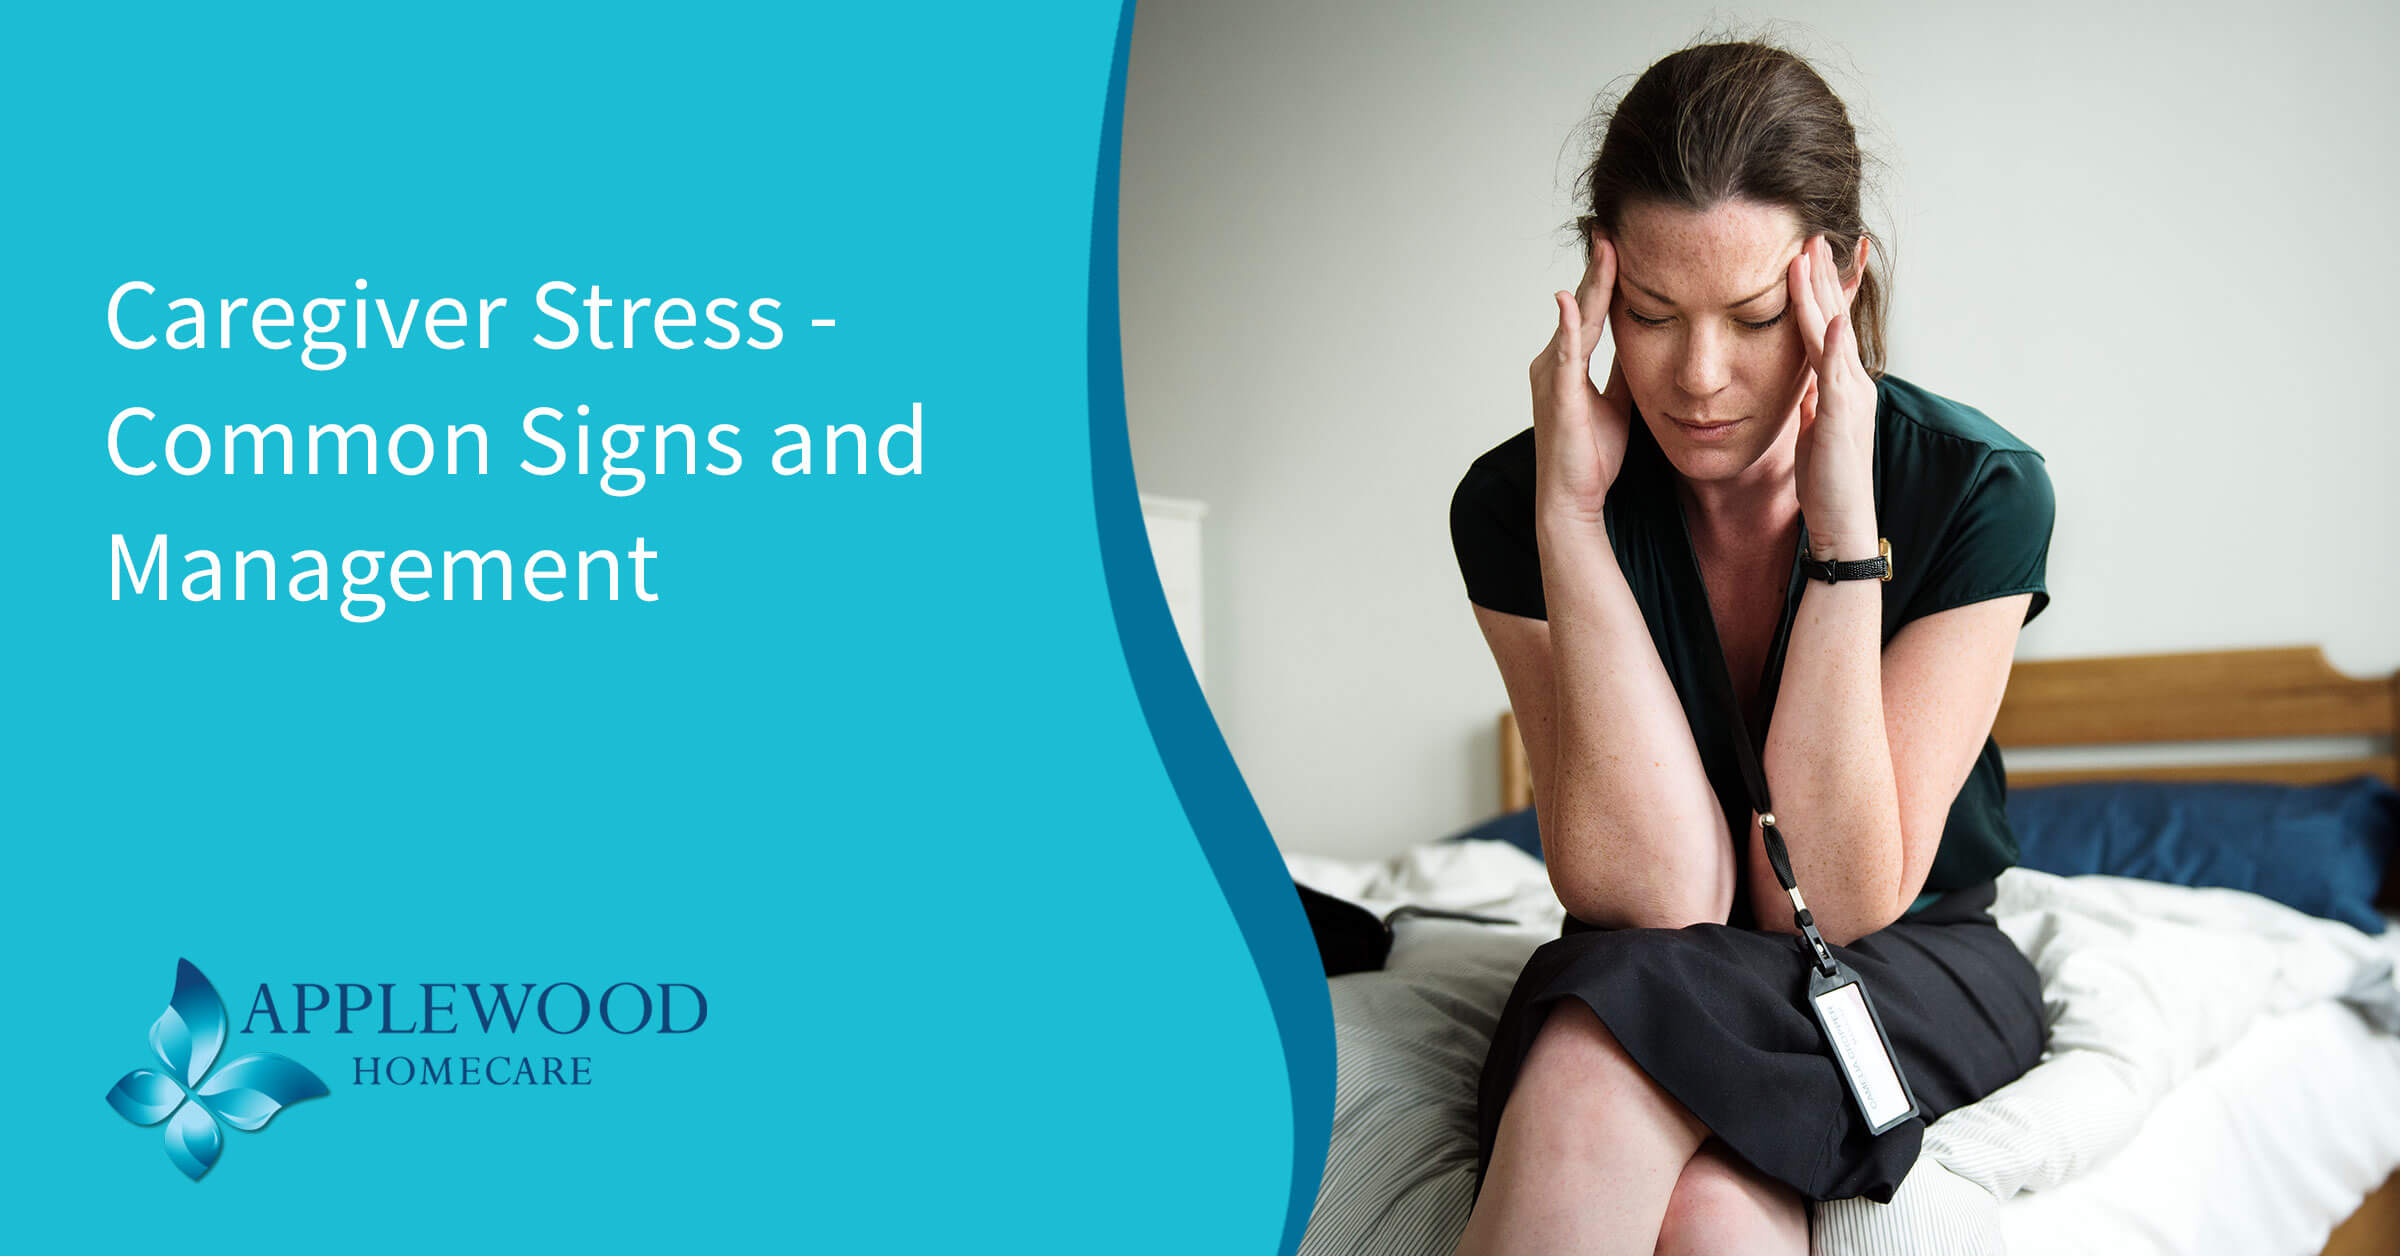 Caregiver Stress - Common Signs and Management